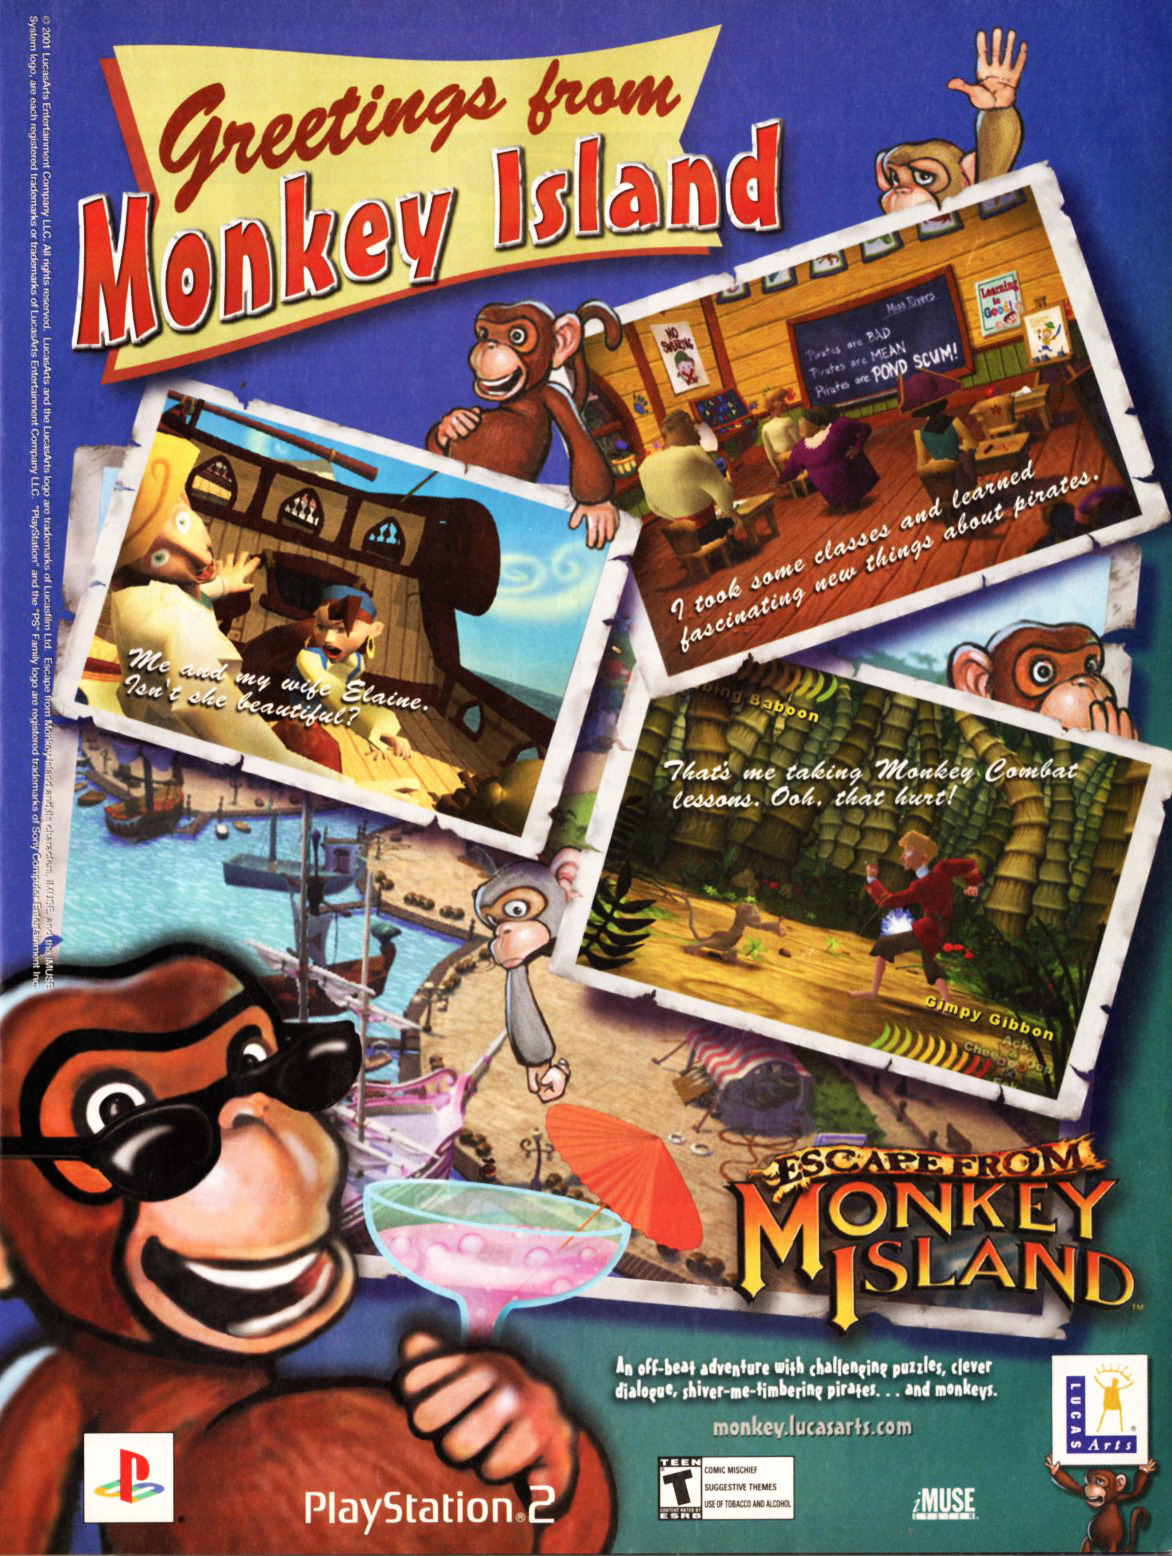 Video Game Print Ads — 'Escape from Monkey Island - “Greetings From...